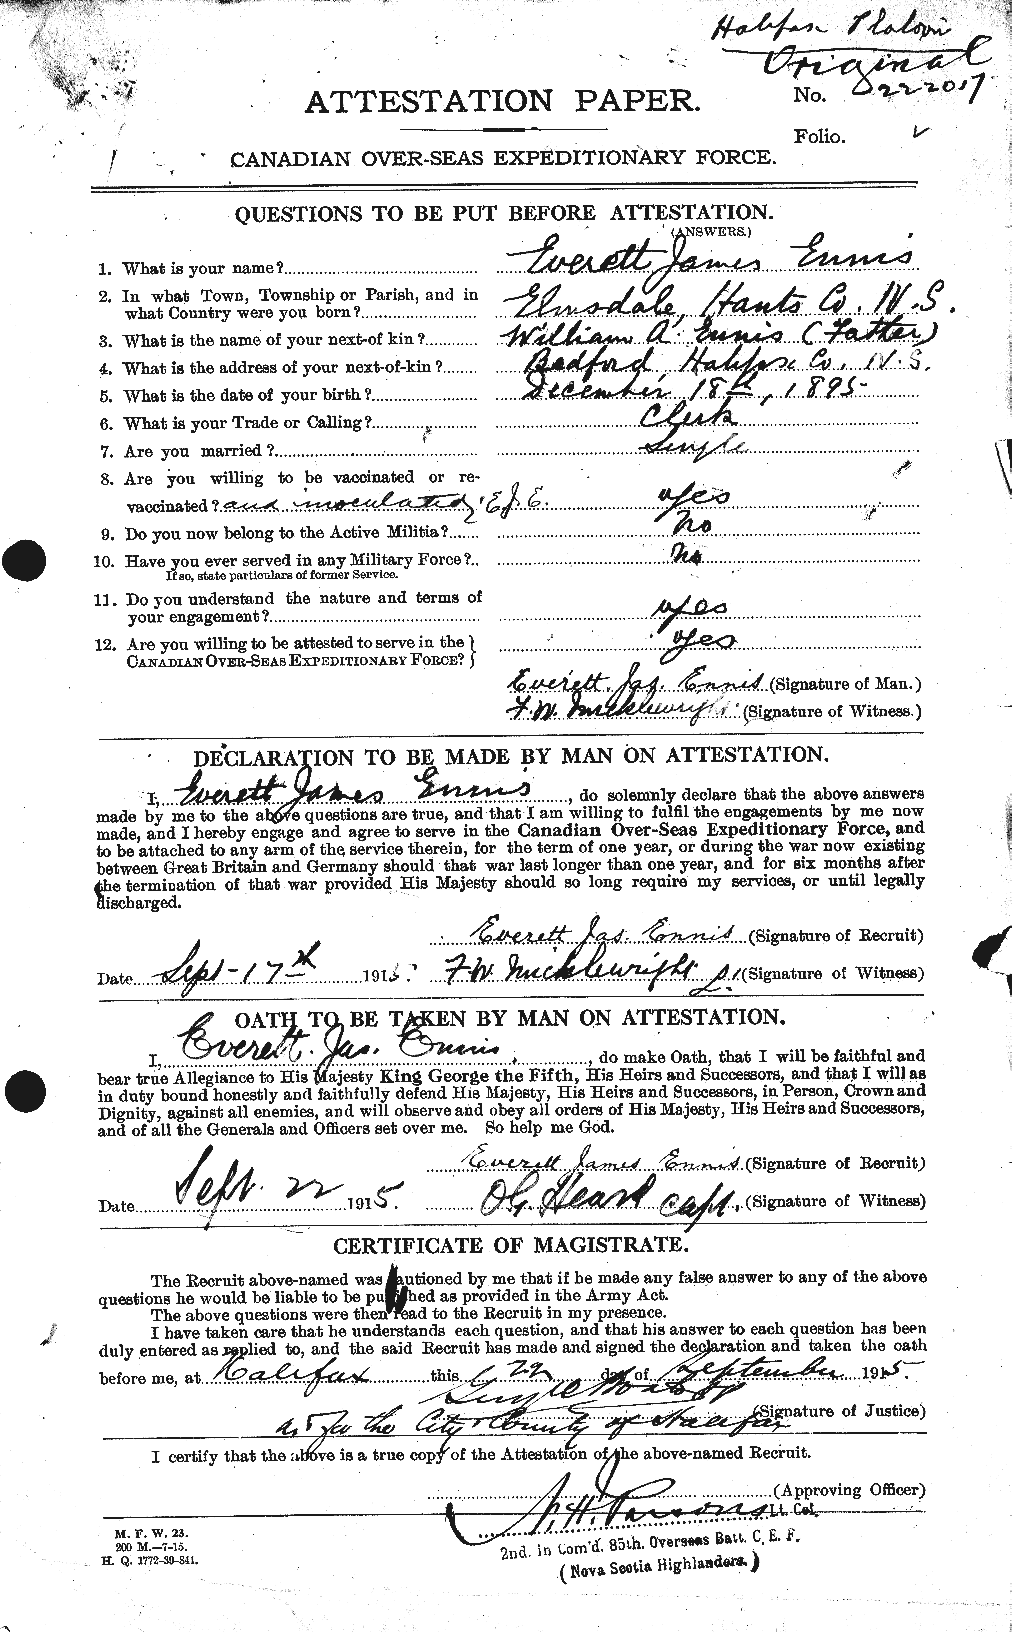 Personnel Records of the First World War - CEF 317314a